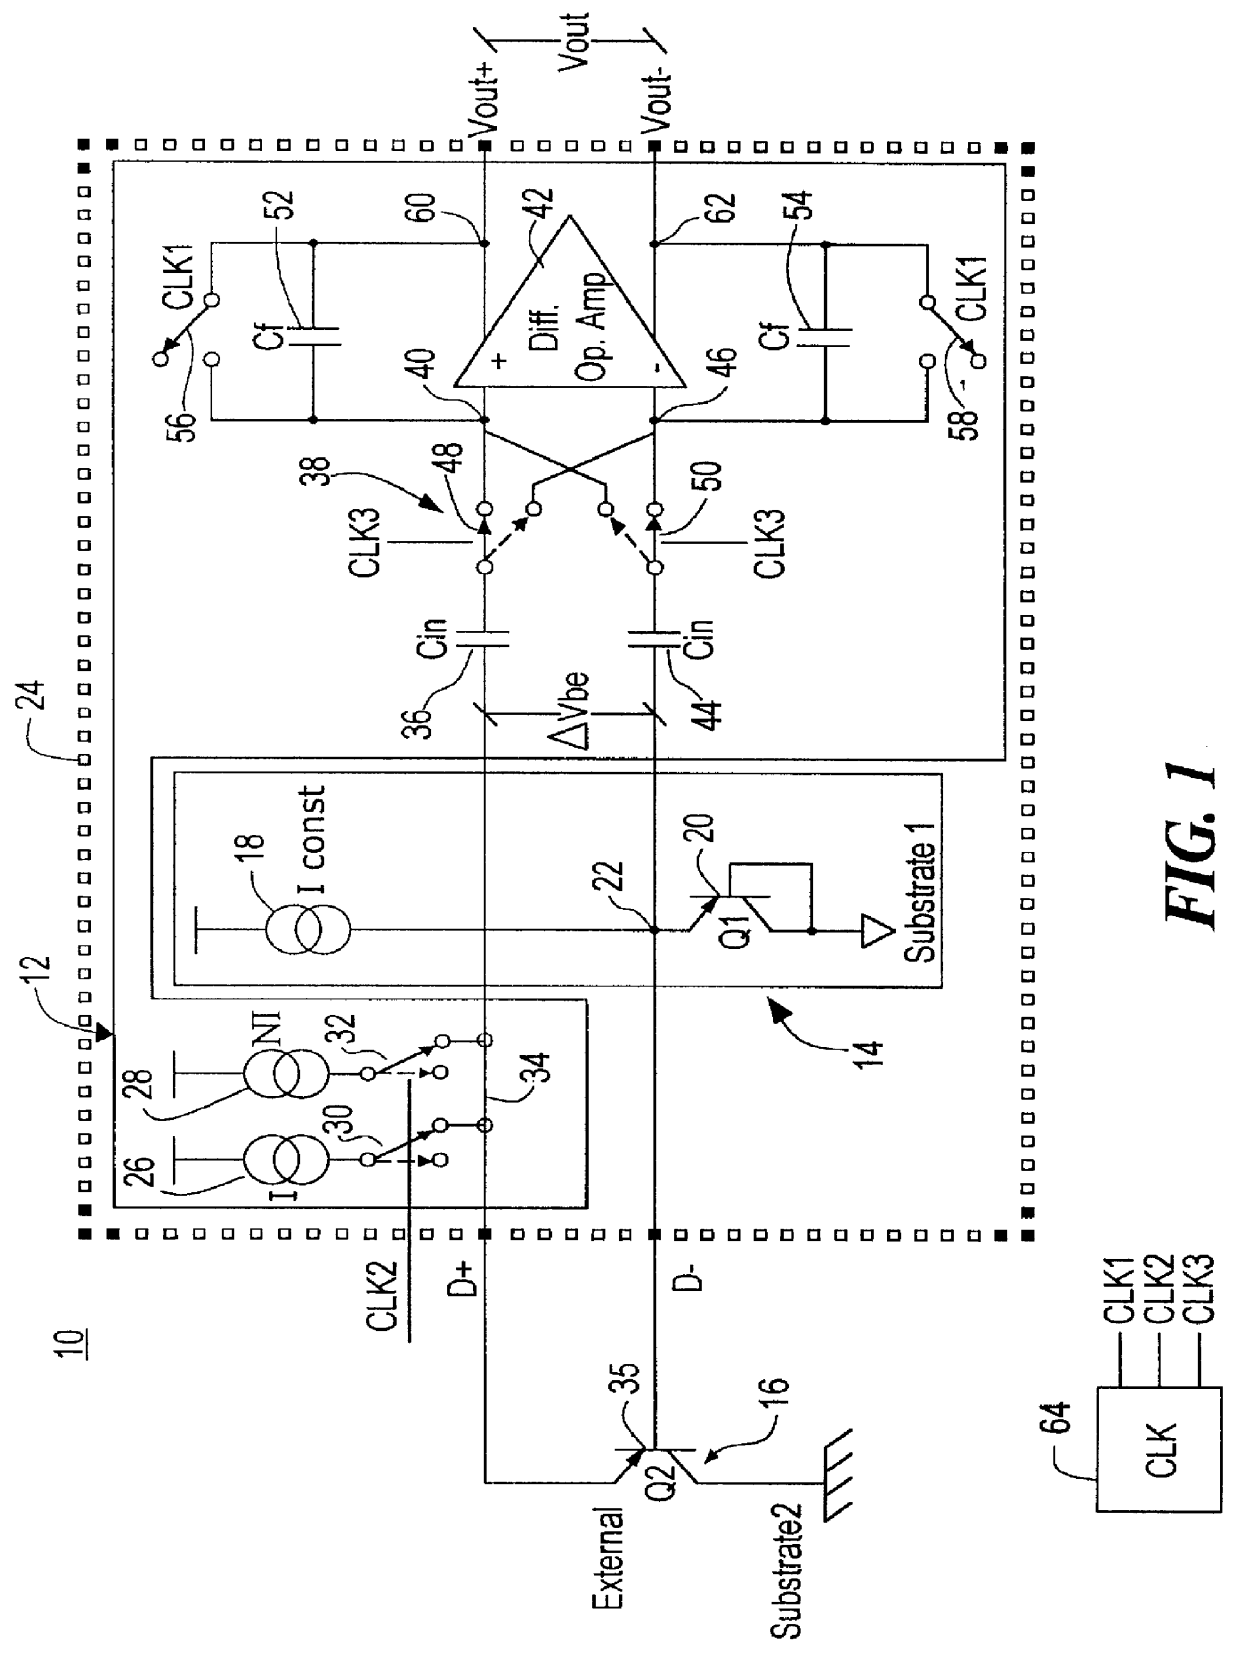 Decoupled switched current temperature circuit with compounded DELTA V be